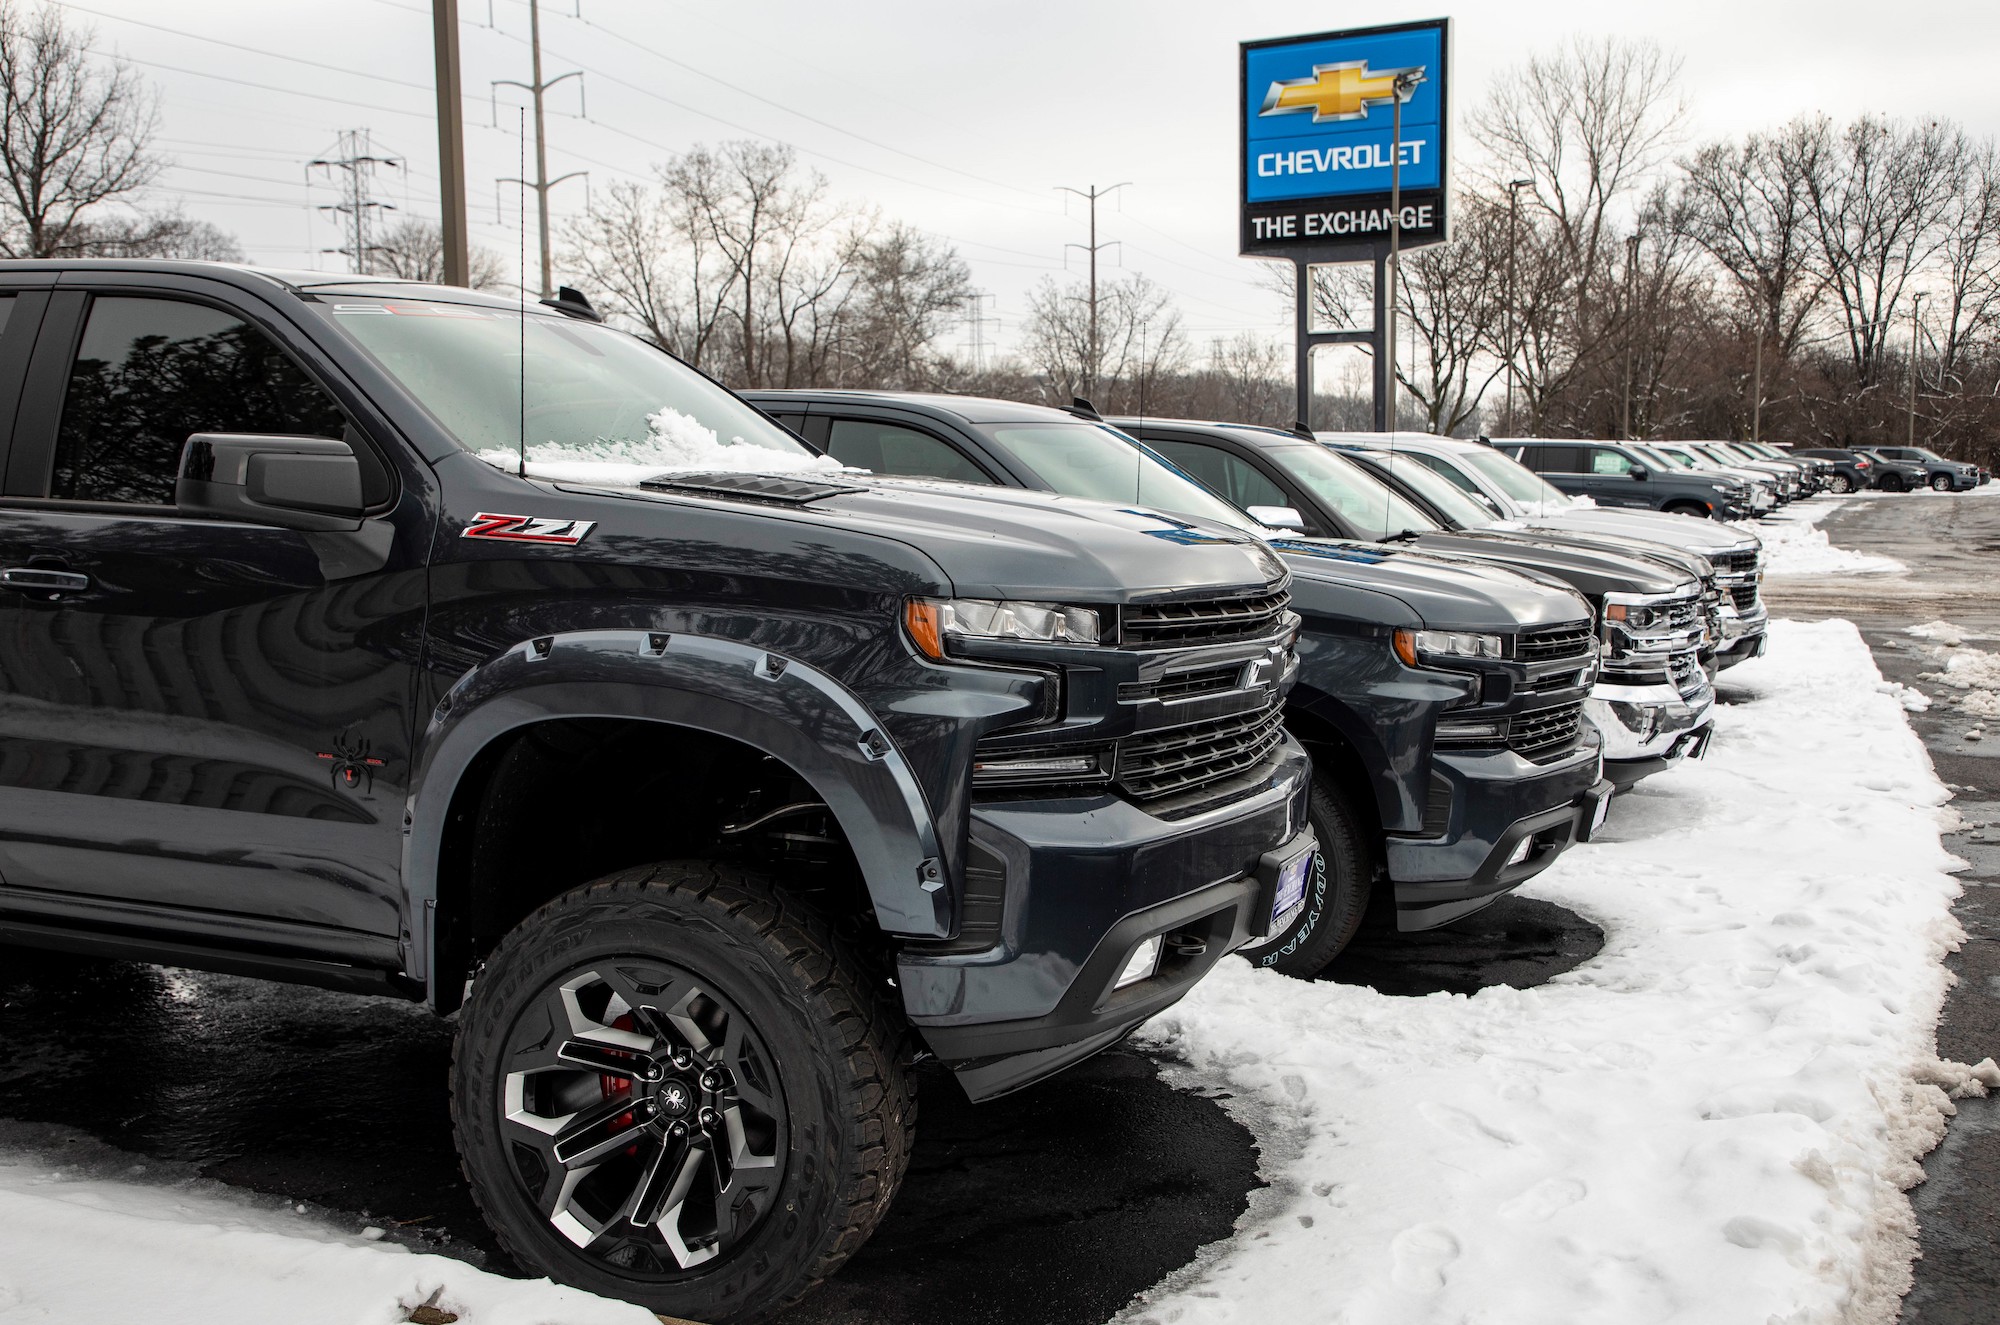 A row of Chevrolet Silverado trucks in a snow-covered parking lot at the Exchange Chevrolet in Lake Bluff, Illinois, on January 5, 2021